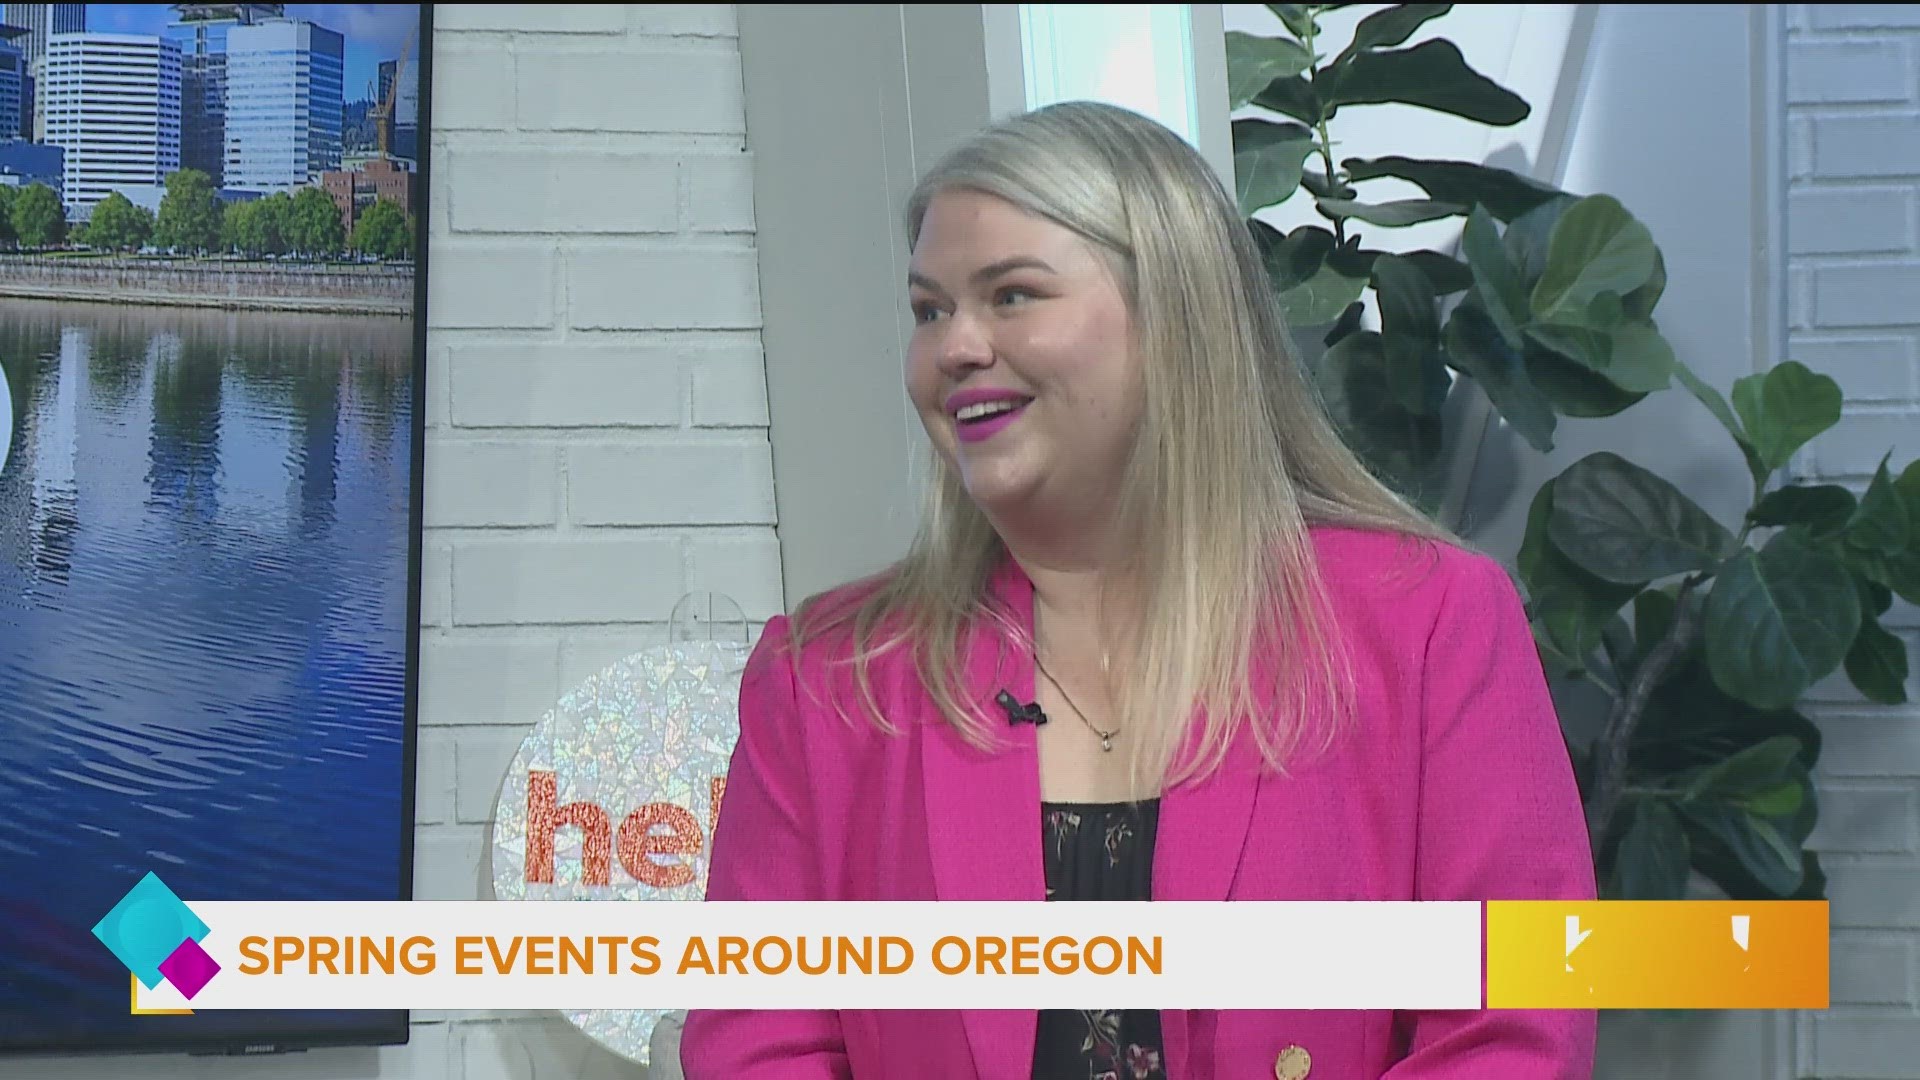 Renee Anderson, known as Wild Oregon Girl on social media, shares events across Oregon involving spring flowers